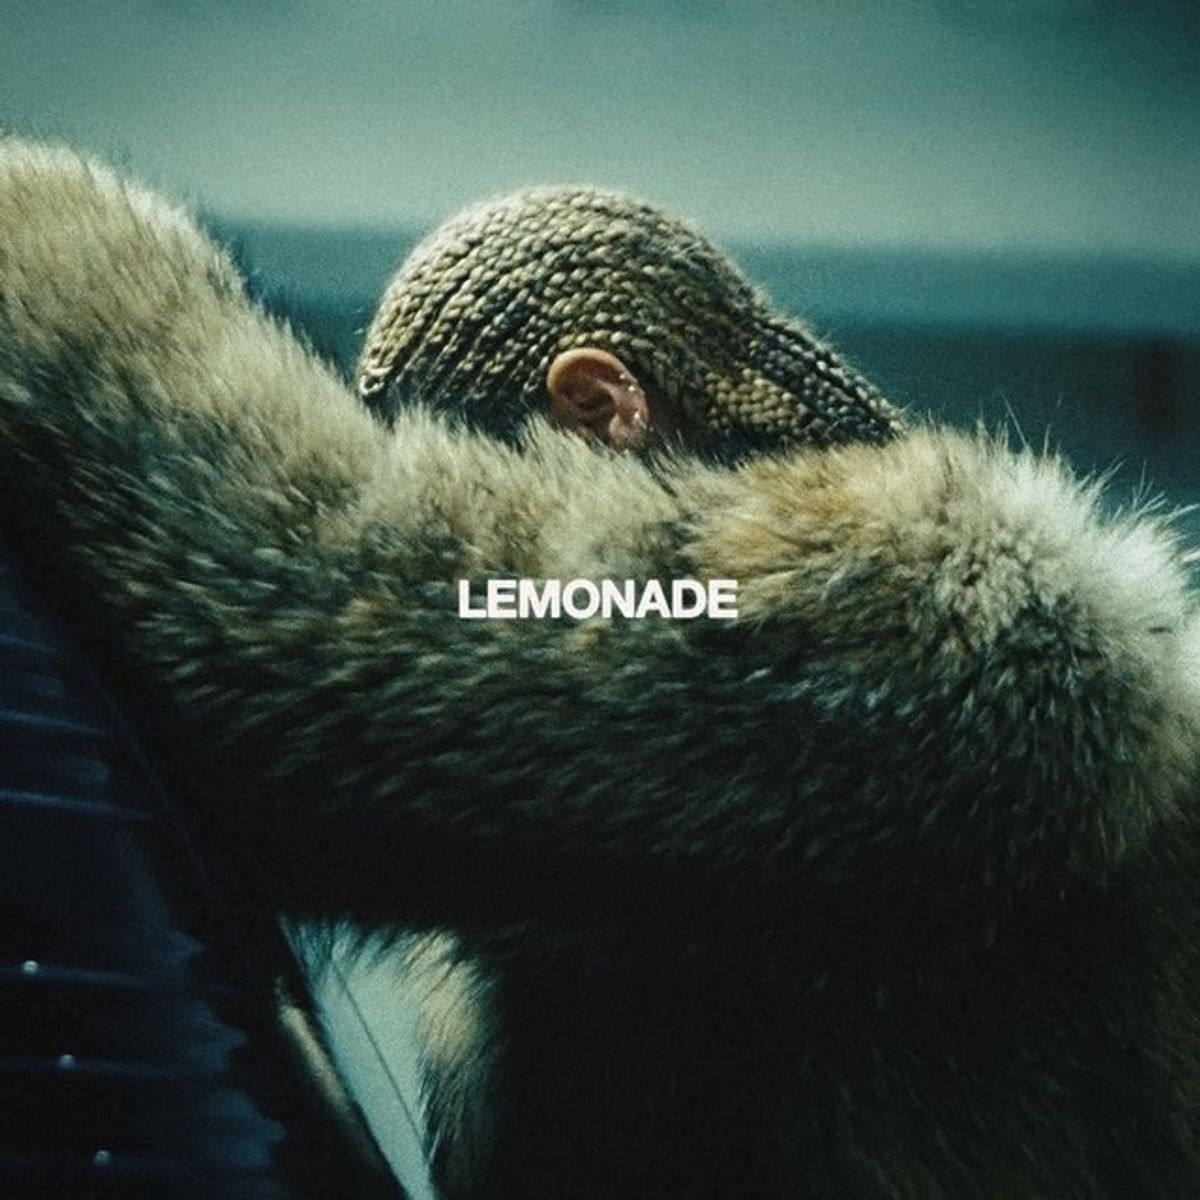 Slowly drinking the Lemonade: My reaction to Beyonce's new album